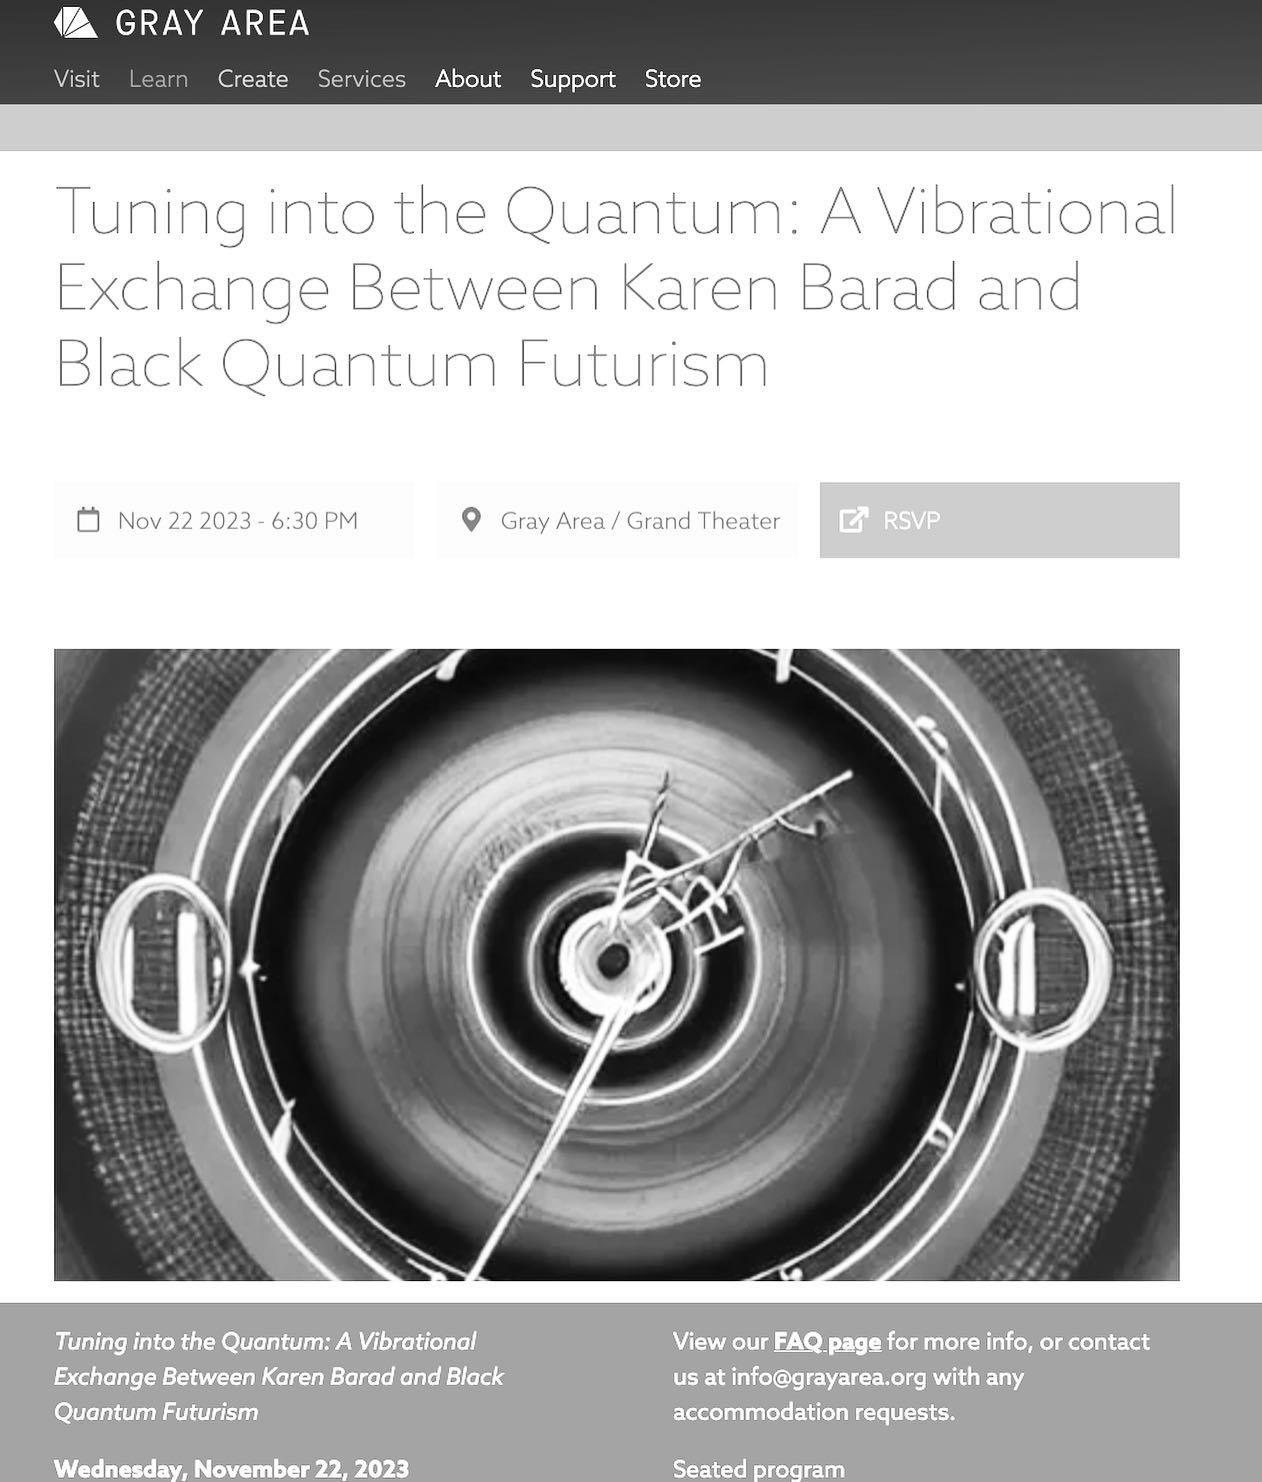 Tuning into the Quantum: A Vibrational Exchange Between Karen Barad and Black Quantum Futurism

This is the last event in a series of talks I've curated exploring quantum thinking. This time, interdisciplinary theorist Prof. Karen Barad and visionary